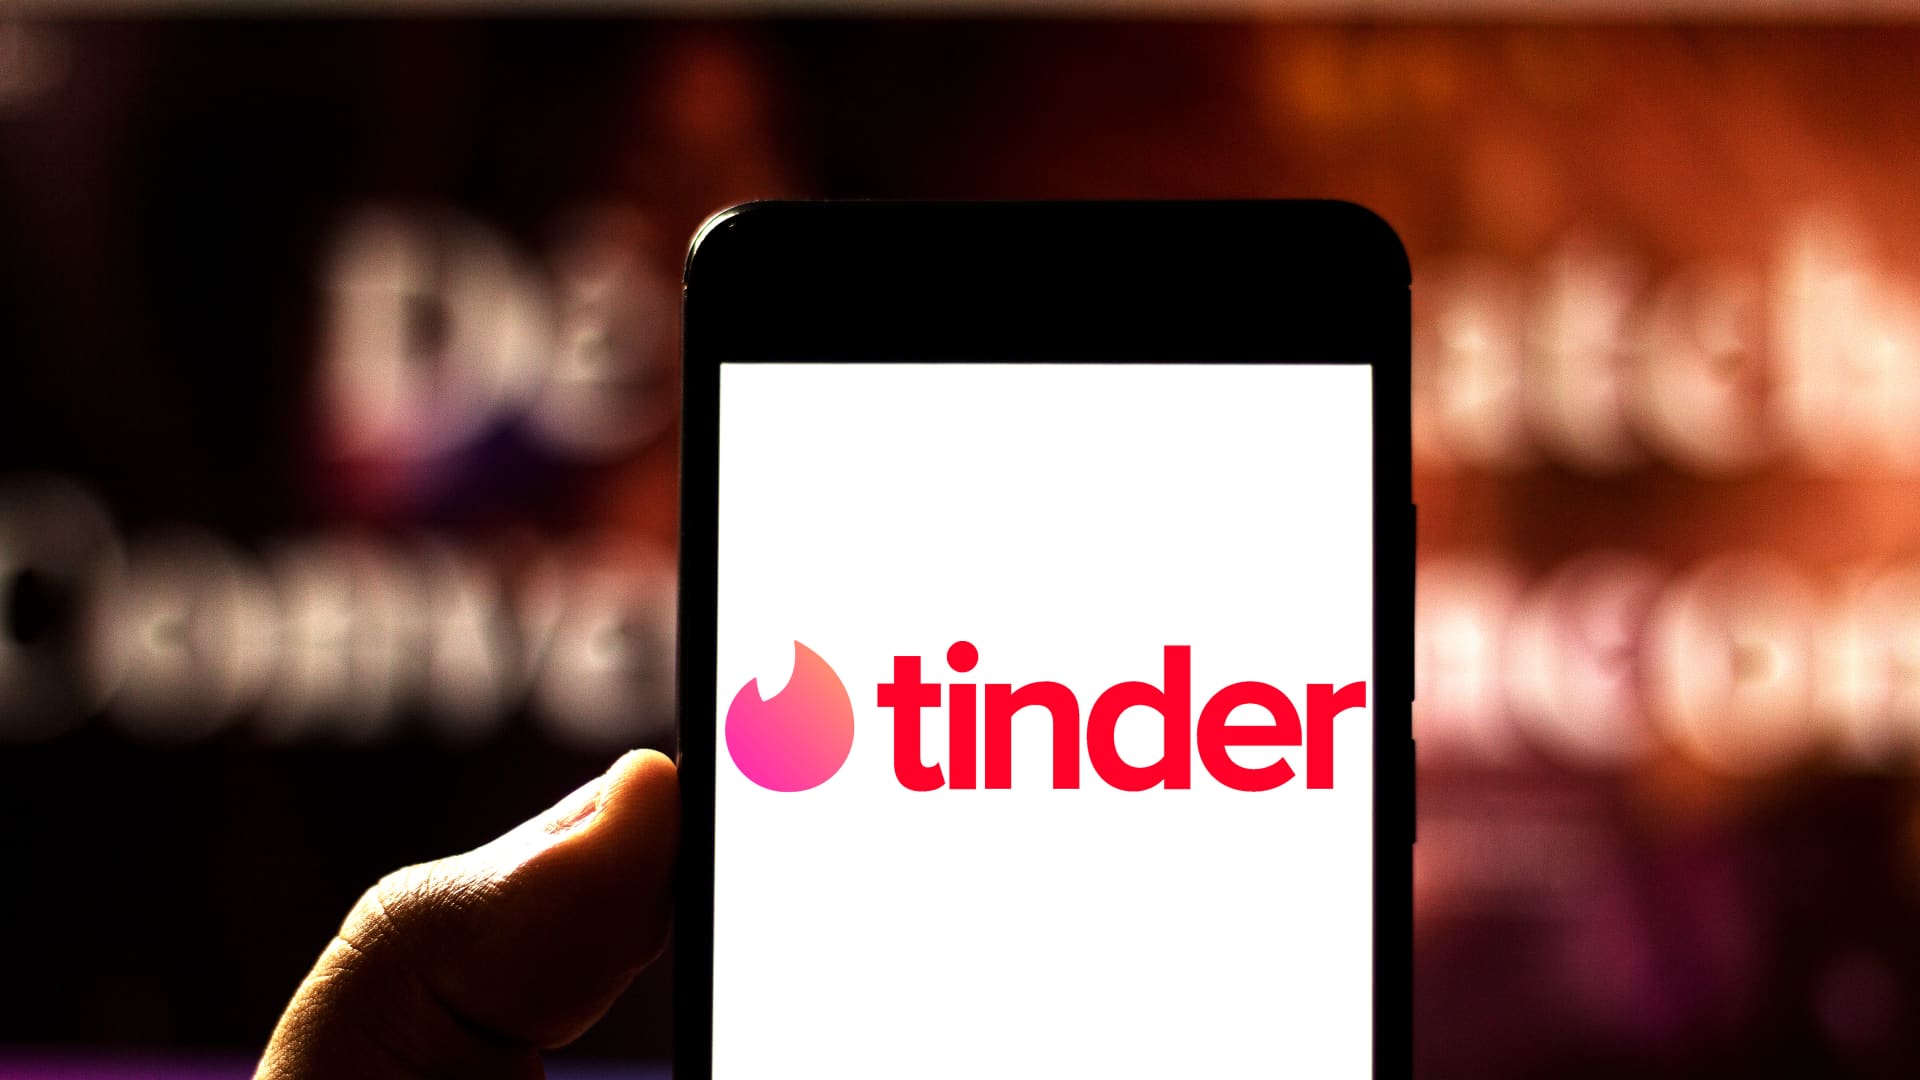 Match Group stock plunges after decline in people paying for Tinder